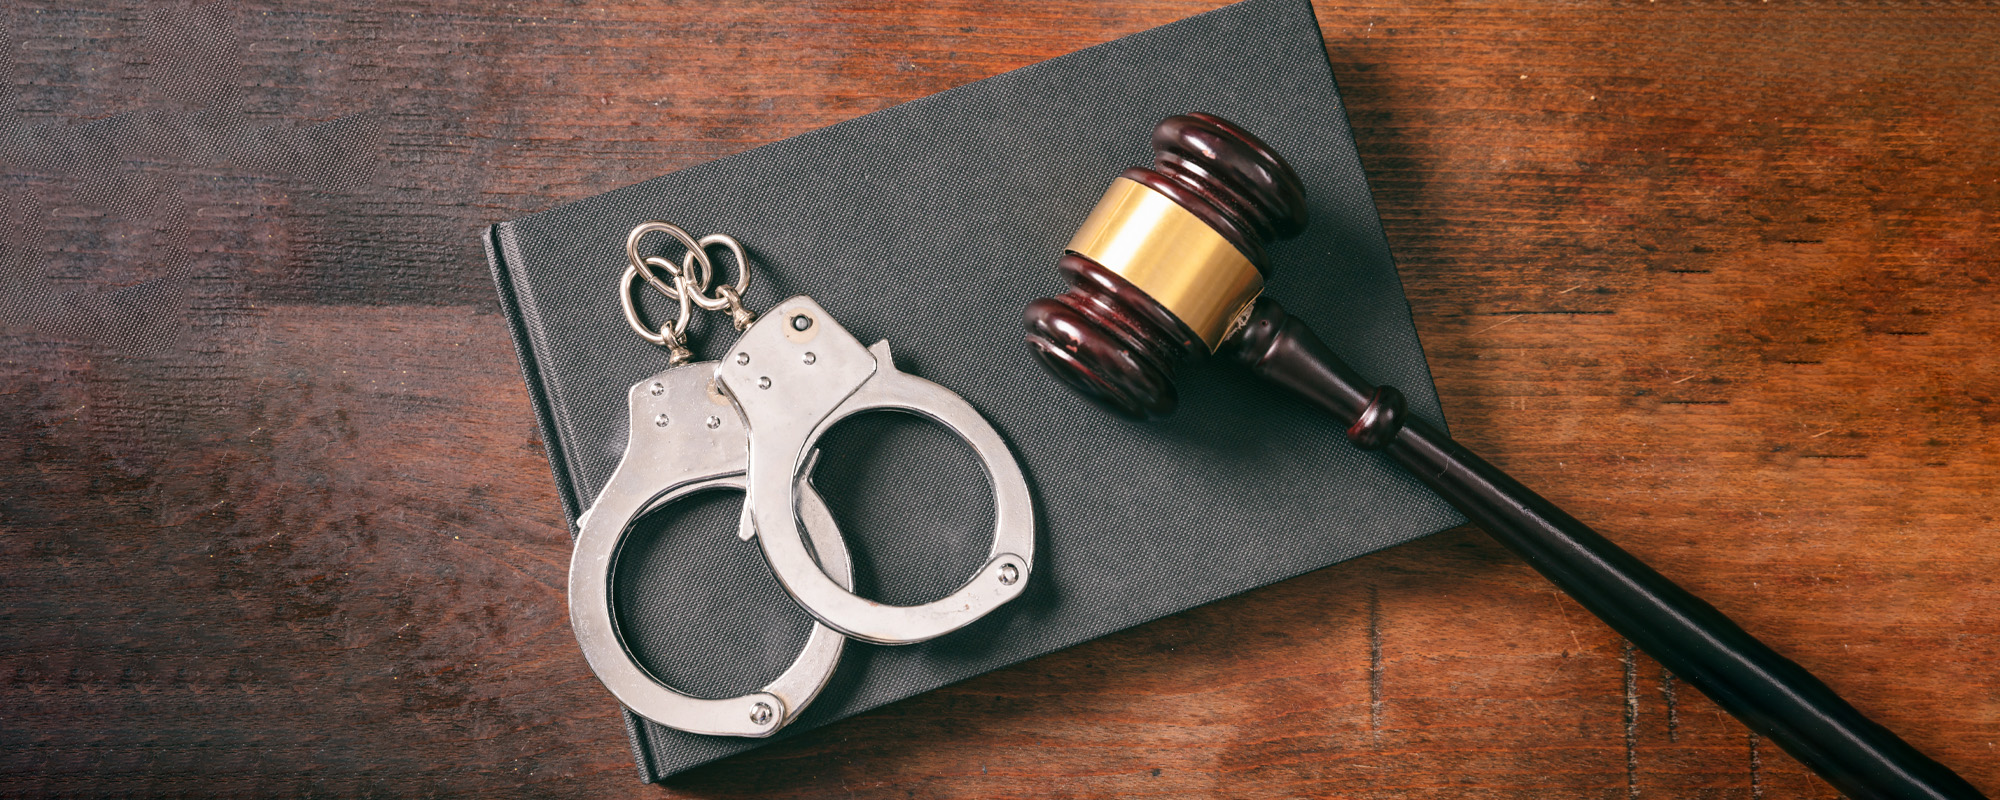 handcuffs gavel on book on a wooden background